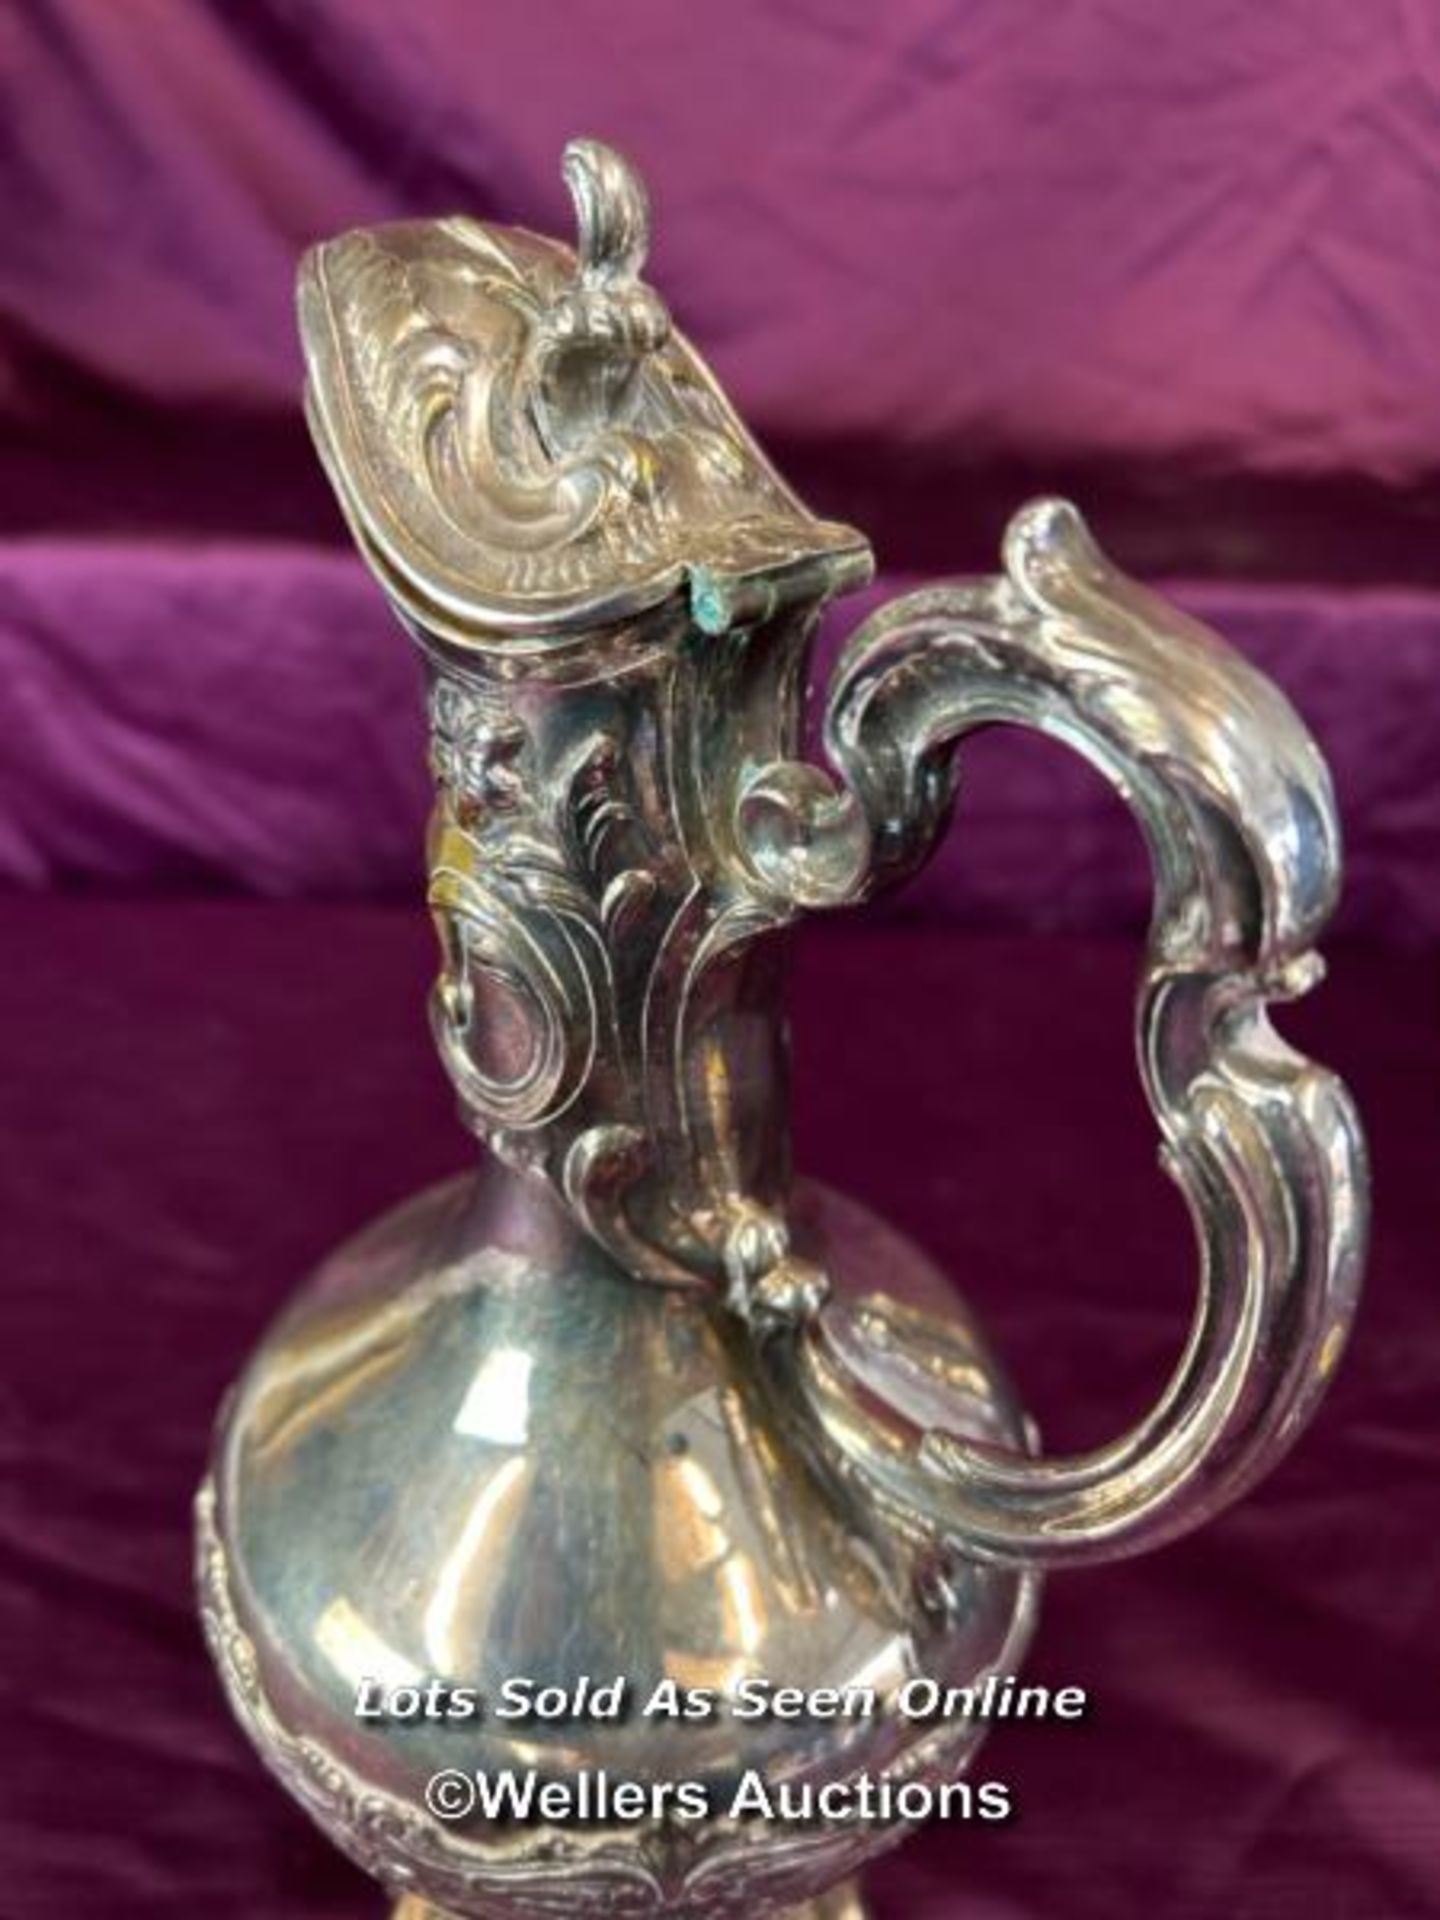 A PORTUGUESE ORNATE SILVER PLATED CLARET JUG, HEIGHT 32CM - Image 3 of 4